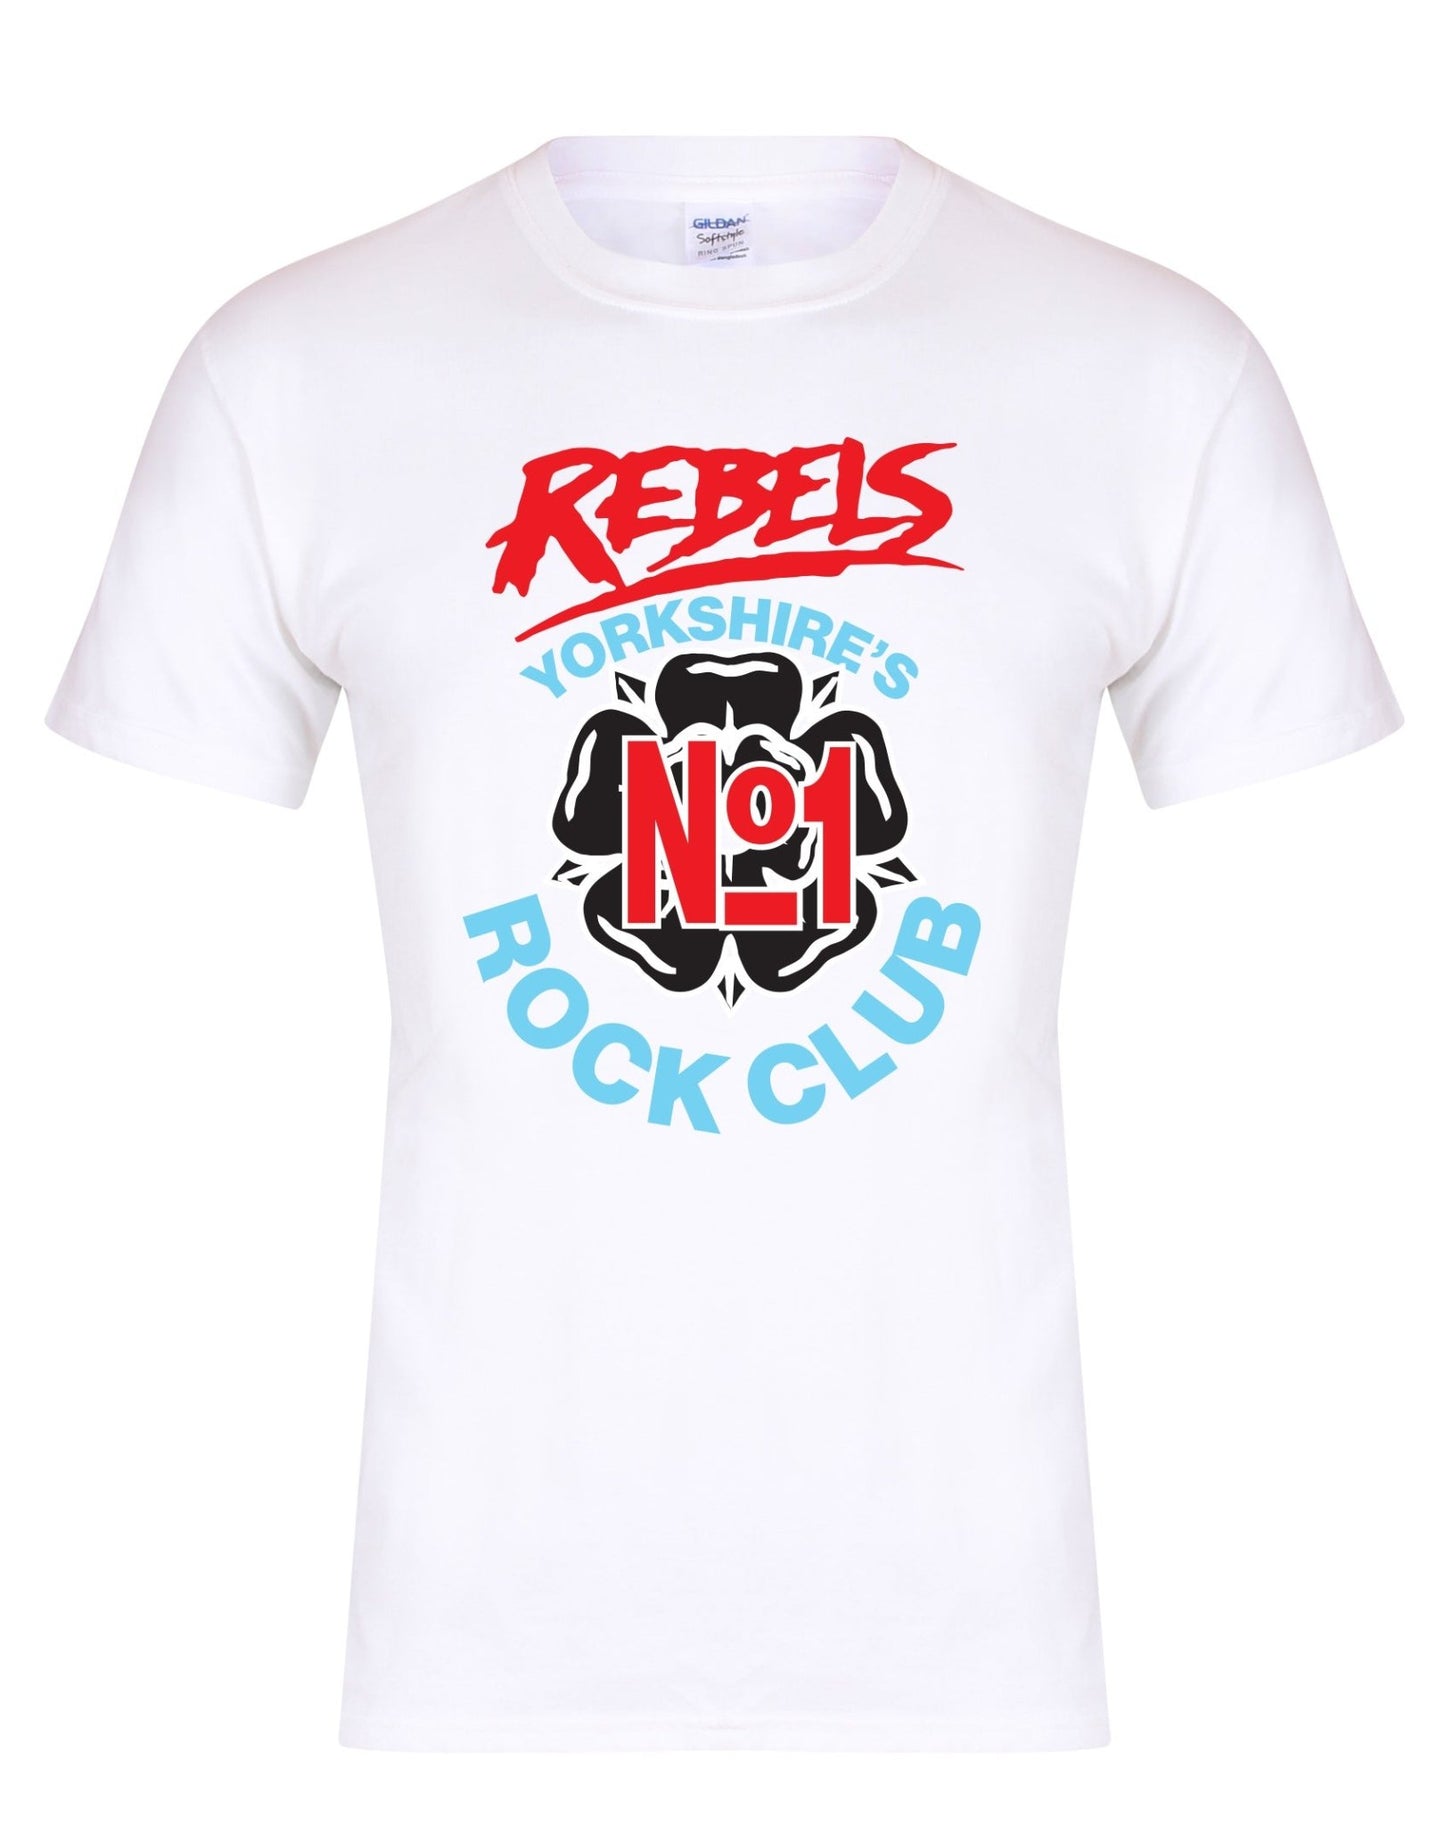 Rebels No. 1 rock club unisex T-shirt - various colours - Dirty Stop Outs